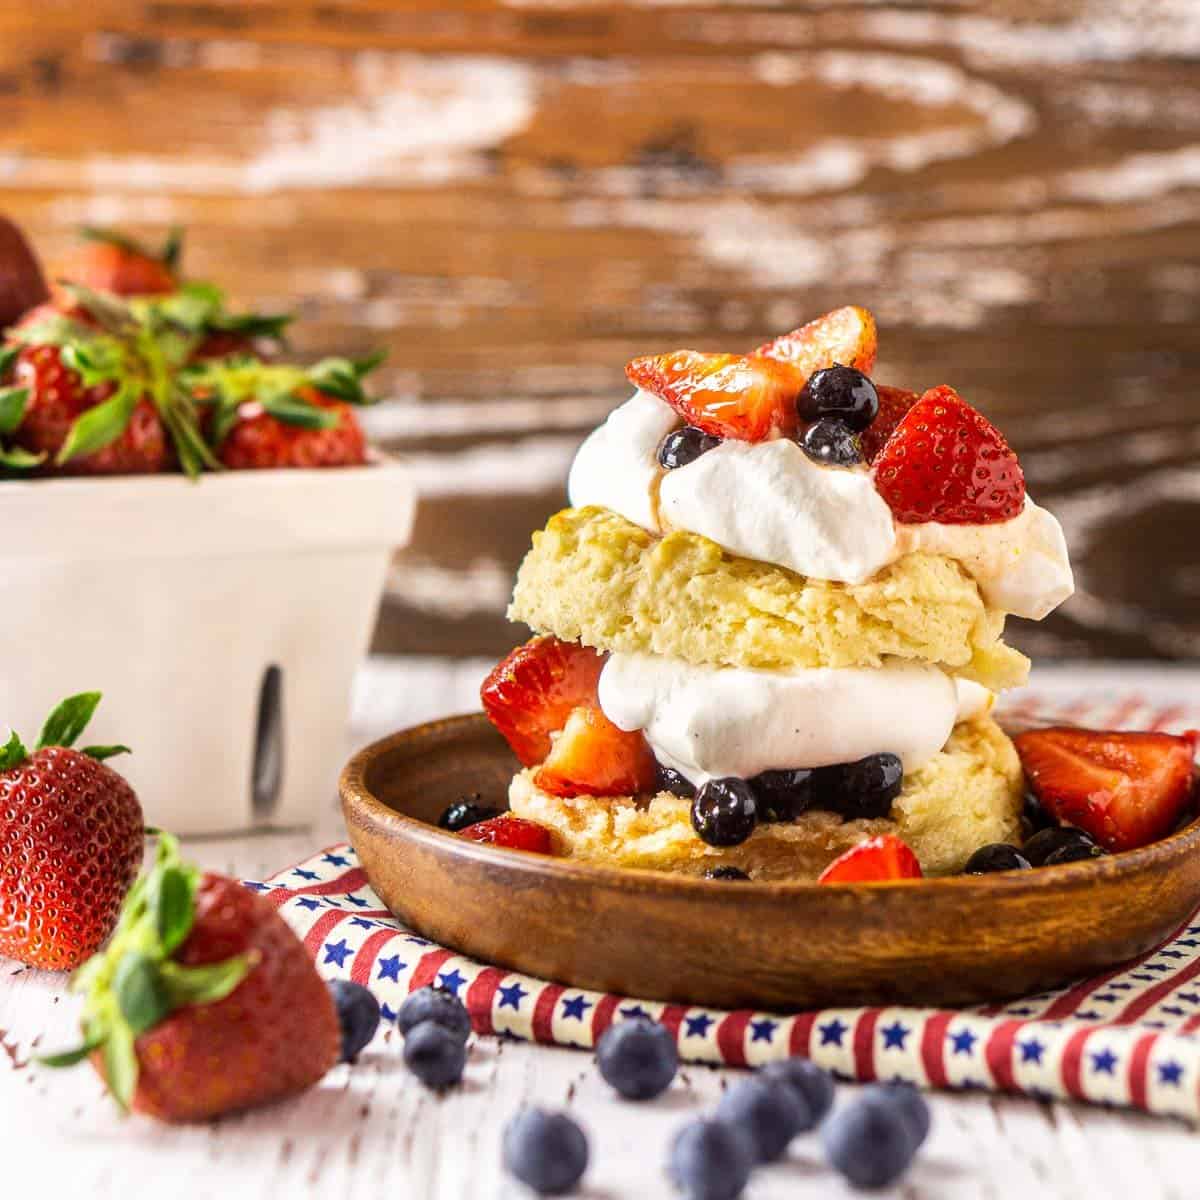 A blueberry-strawberry shortcake on patriotic clothe with fruit surrounding it.